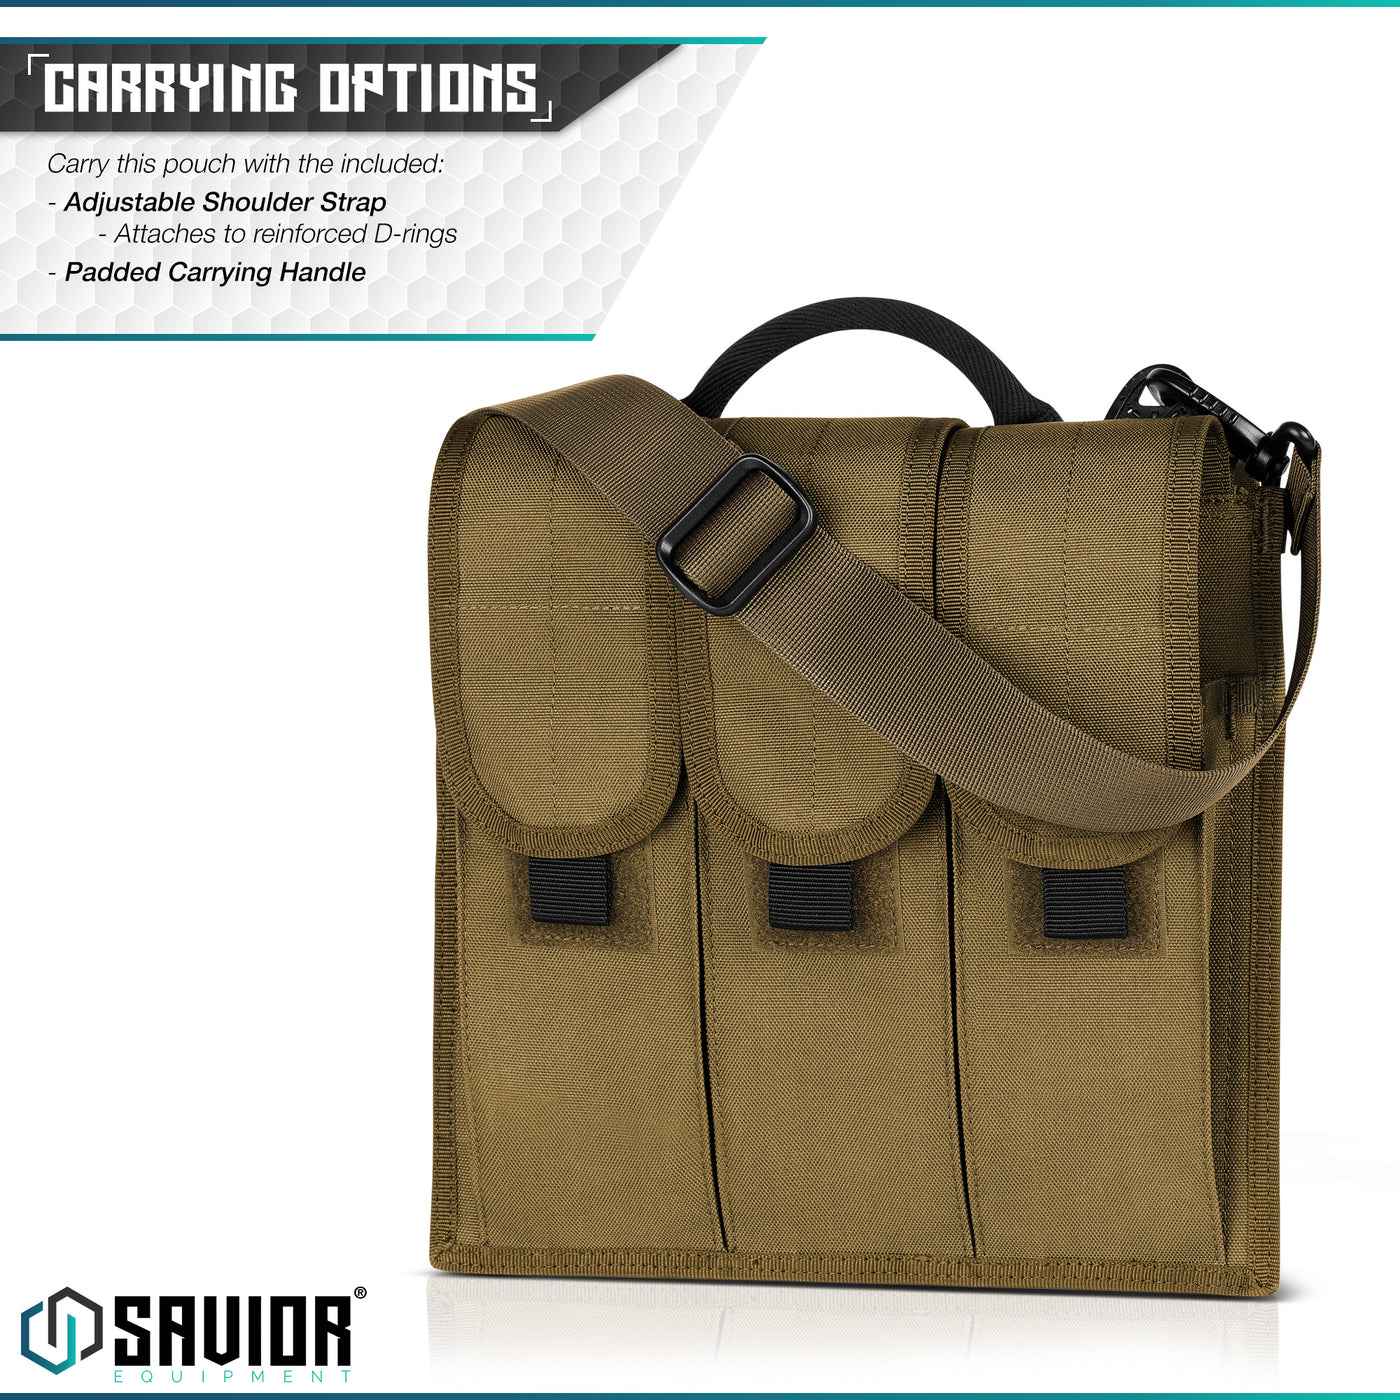 Multiple Carrying Options - Carry this pouch with the included: Adjustable shoulder strap. Attach to reinforced D-rings. Padded carrying handle.